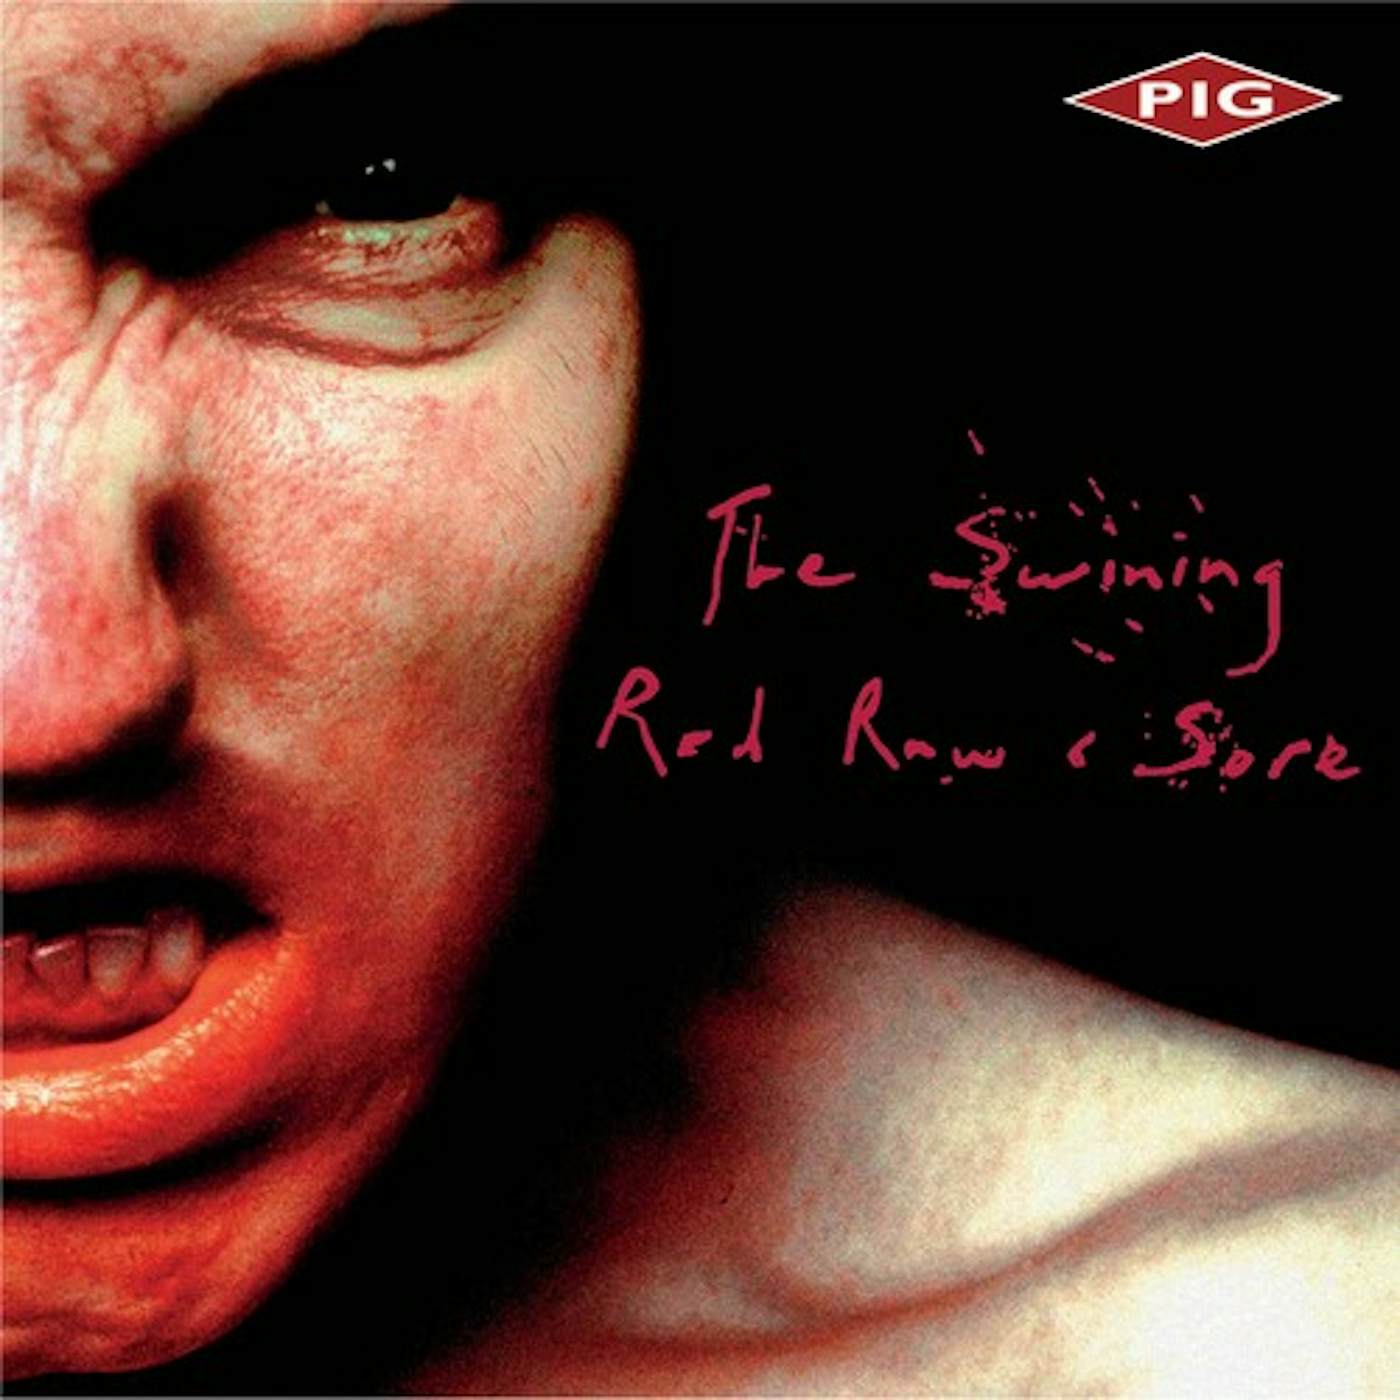 PIG SWINING / RED RAW & SORE - RED MARBLE Vinyl Record